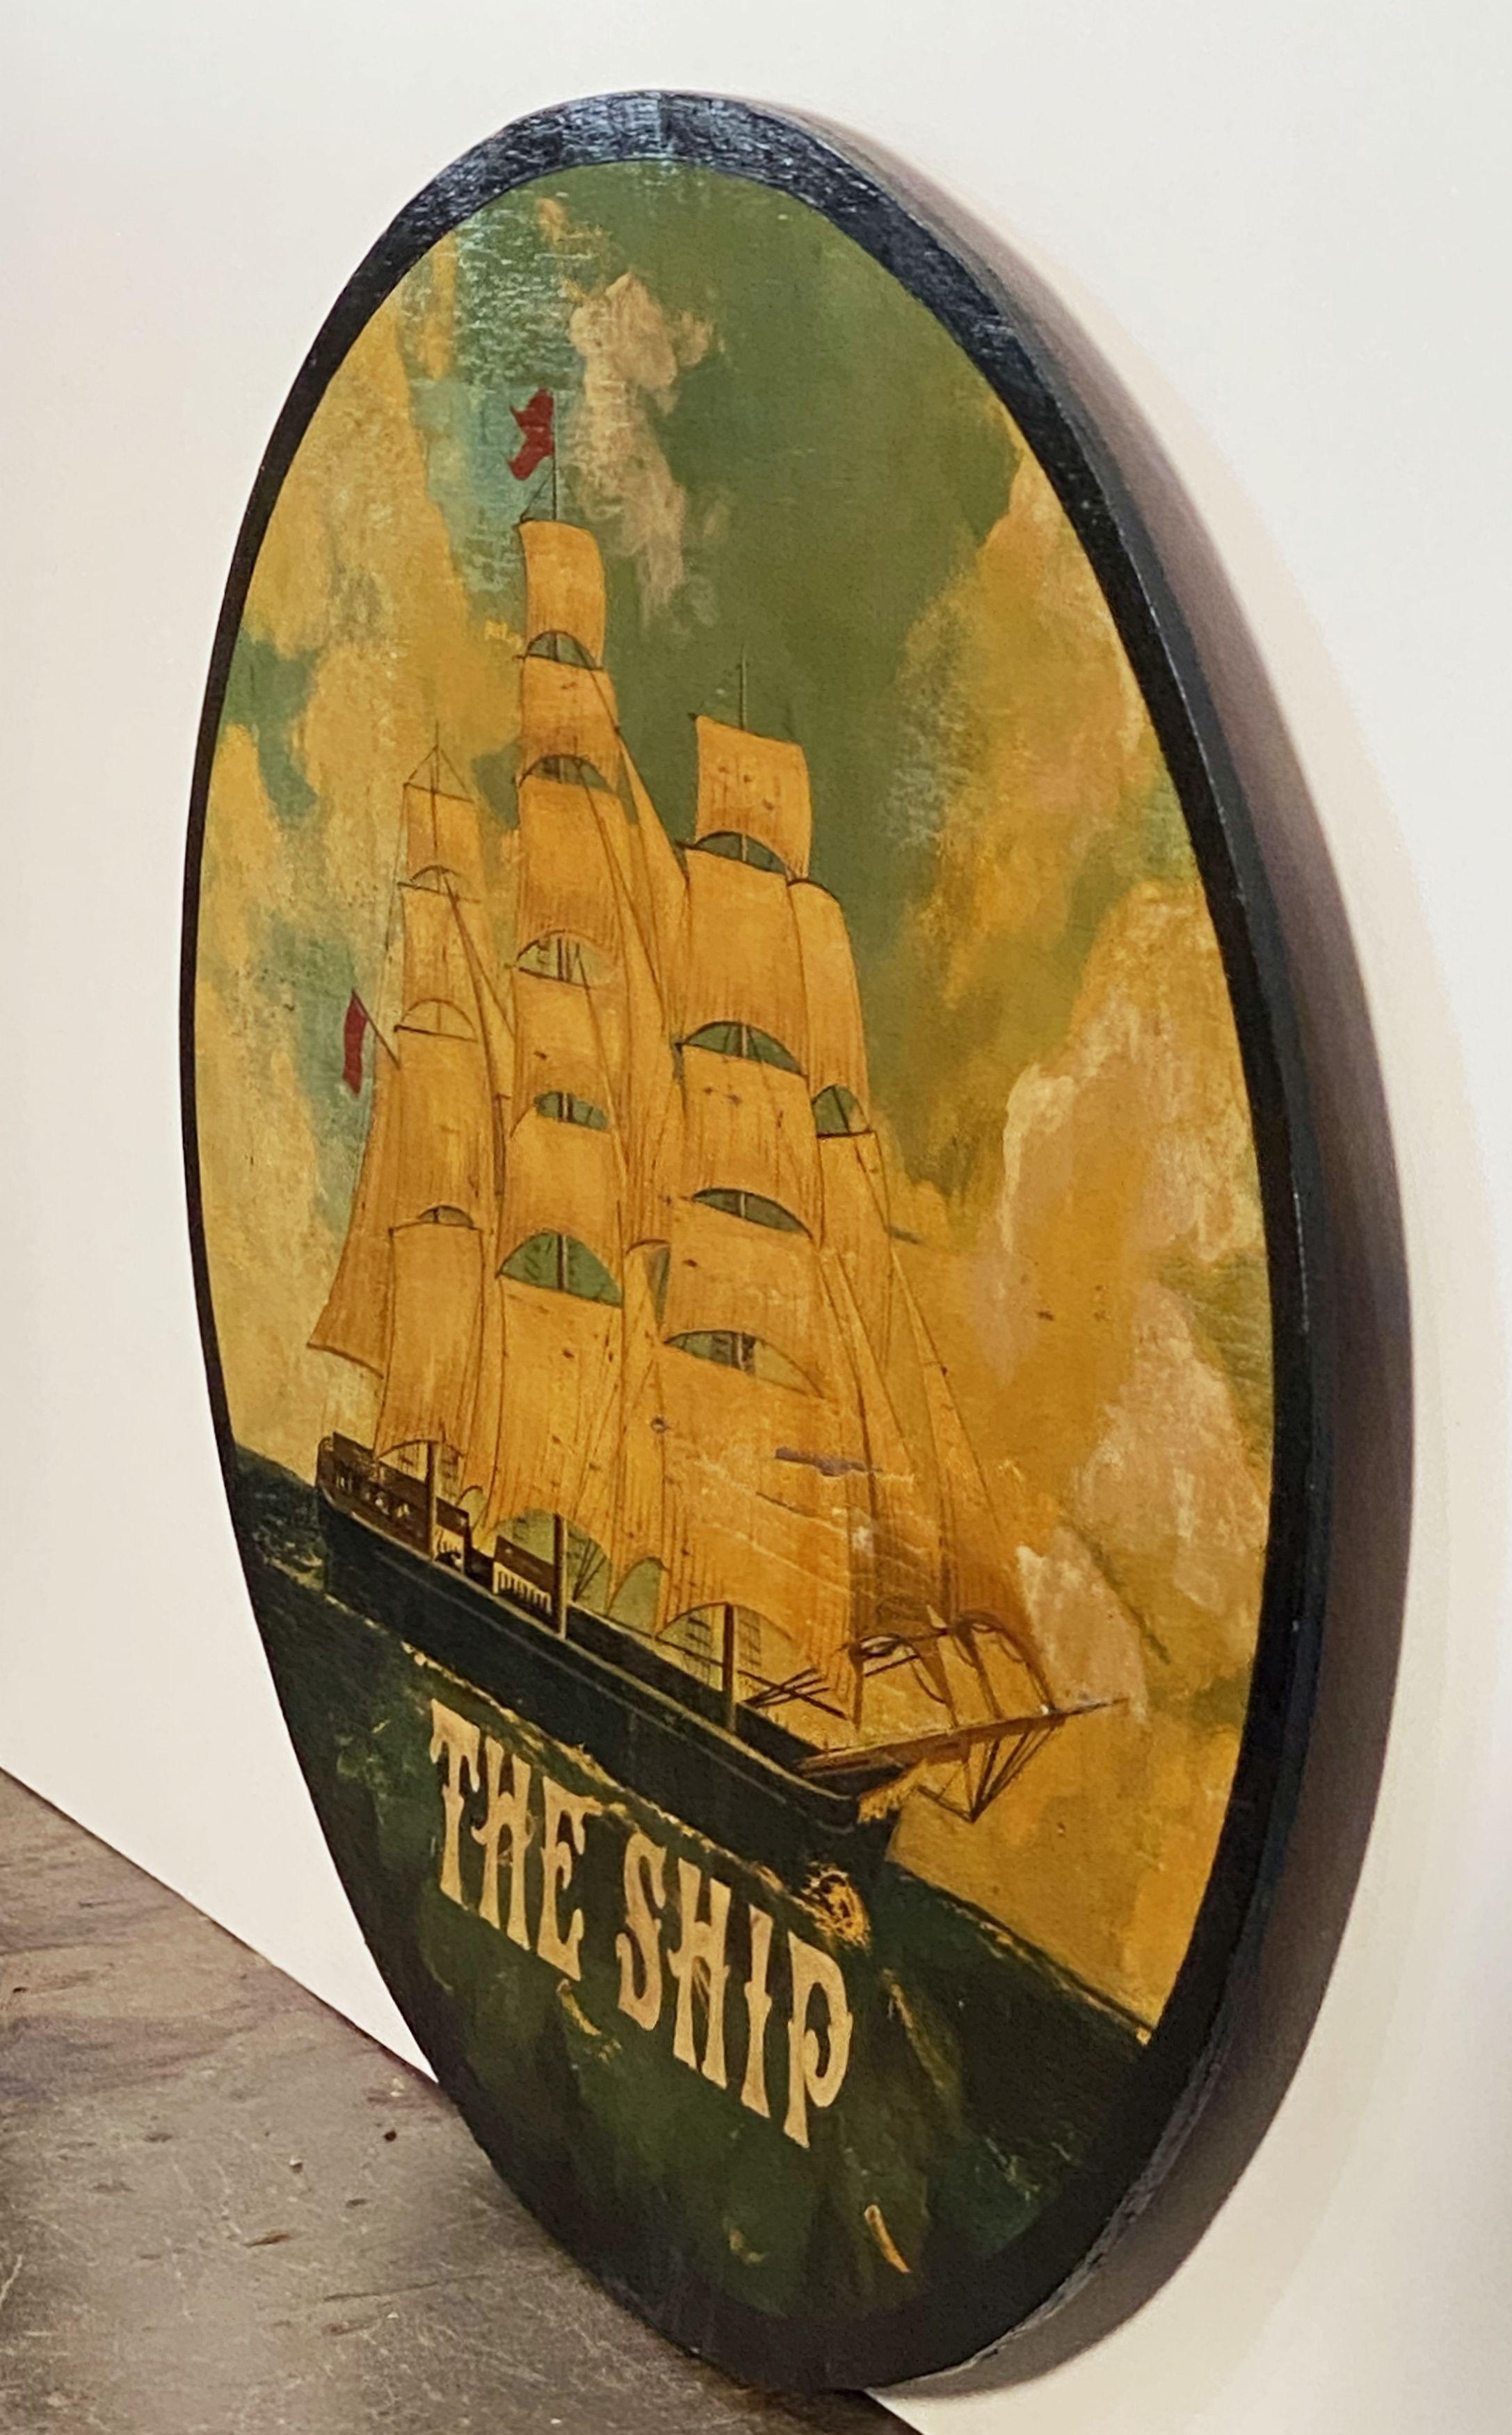 An authentic English pub sign (one-sided) featuring a painting of a three-masted sailing ship upon the sea, entitled: The Ship, on an oval wood backing or support.

A very fine example of vintage advertising artwork and ready for display.